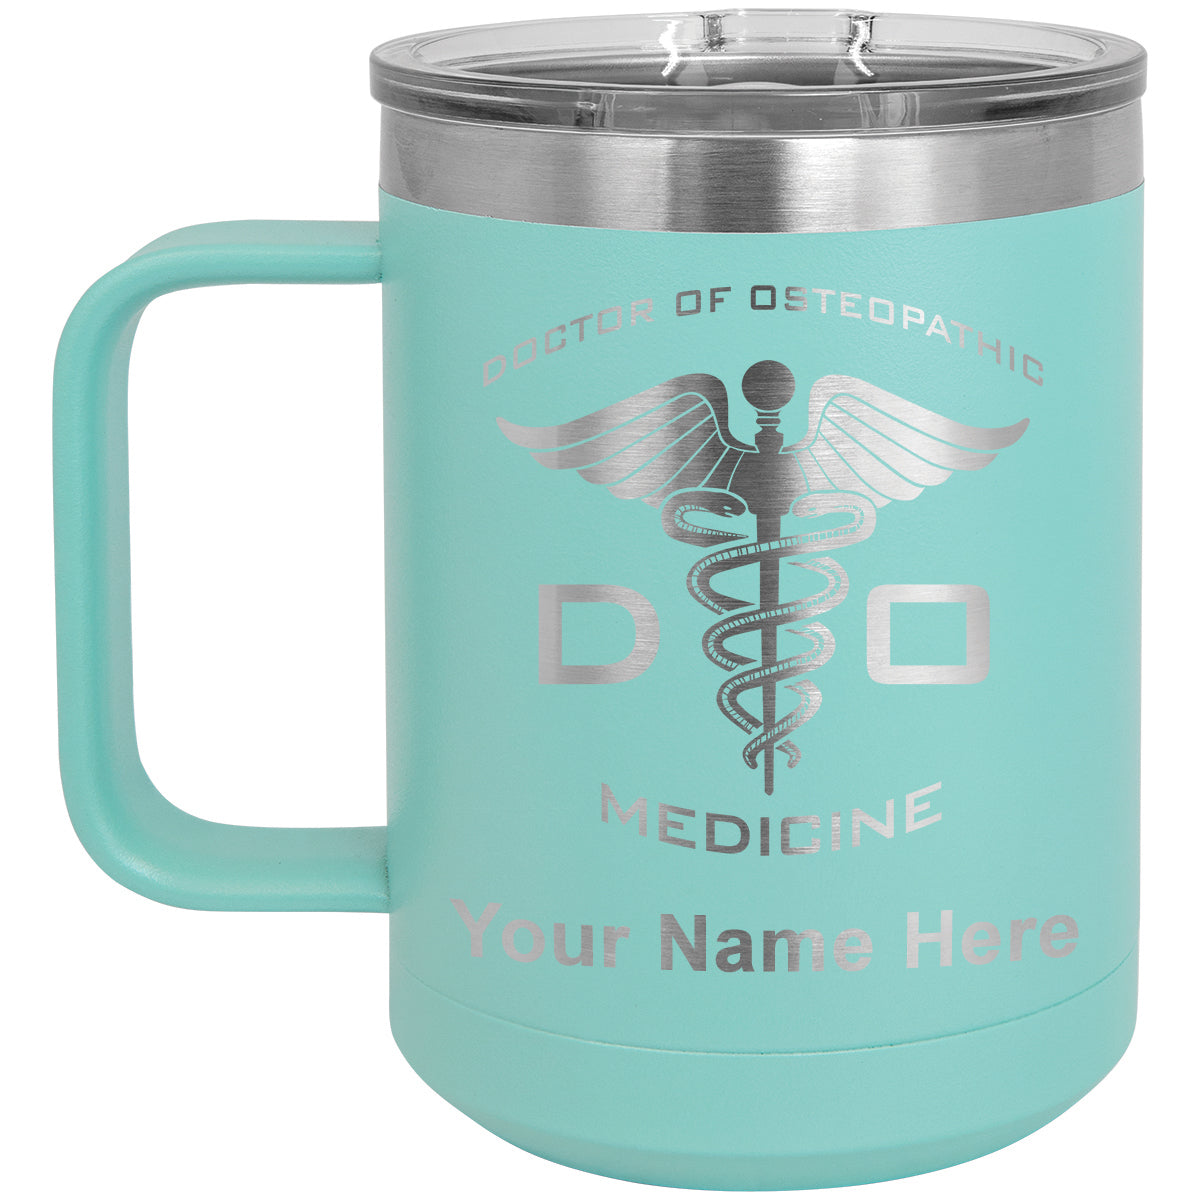 Close to Her Heart Personalized 14 oz. Commuter Travel Mug